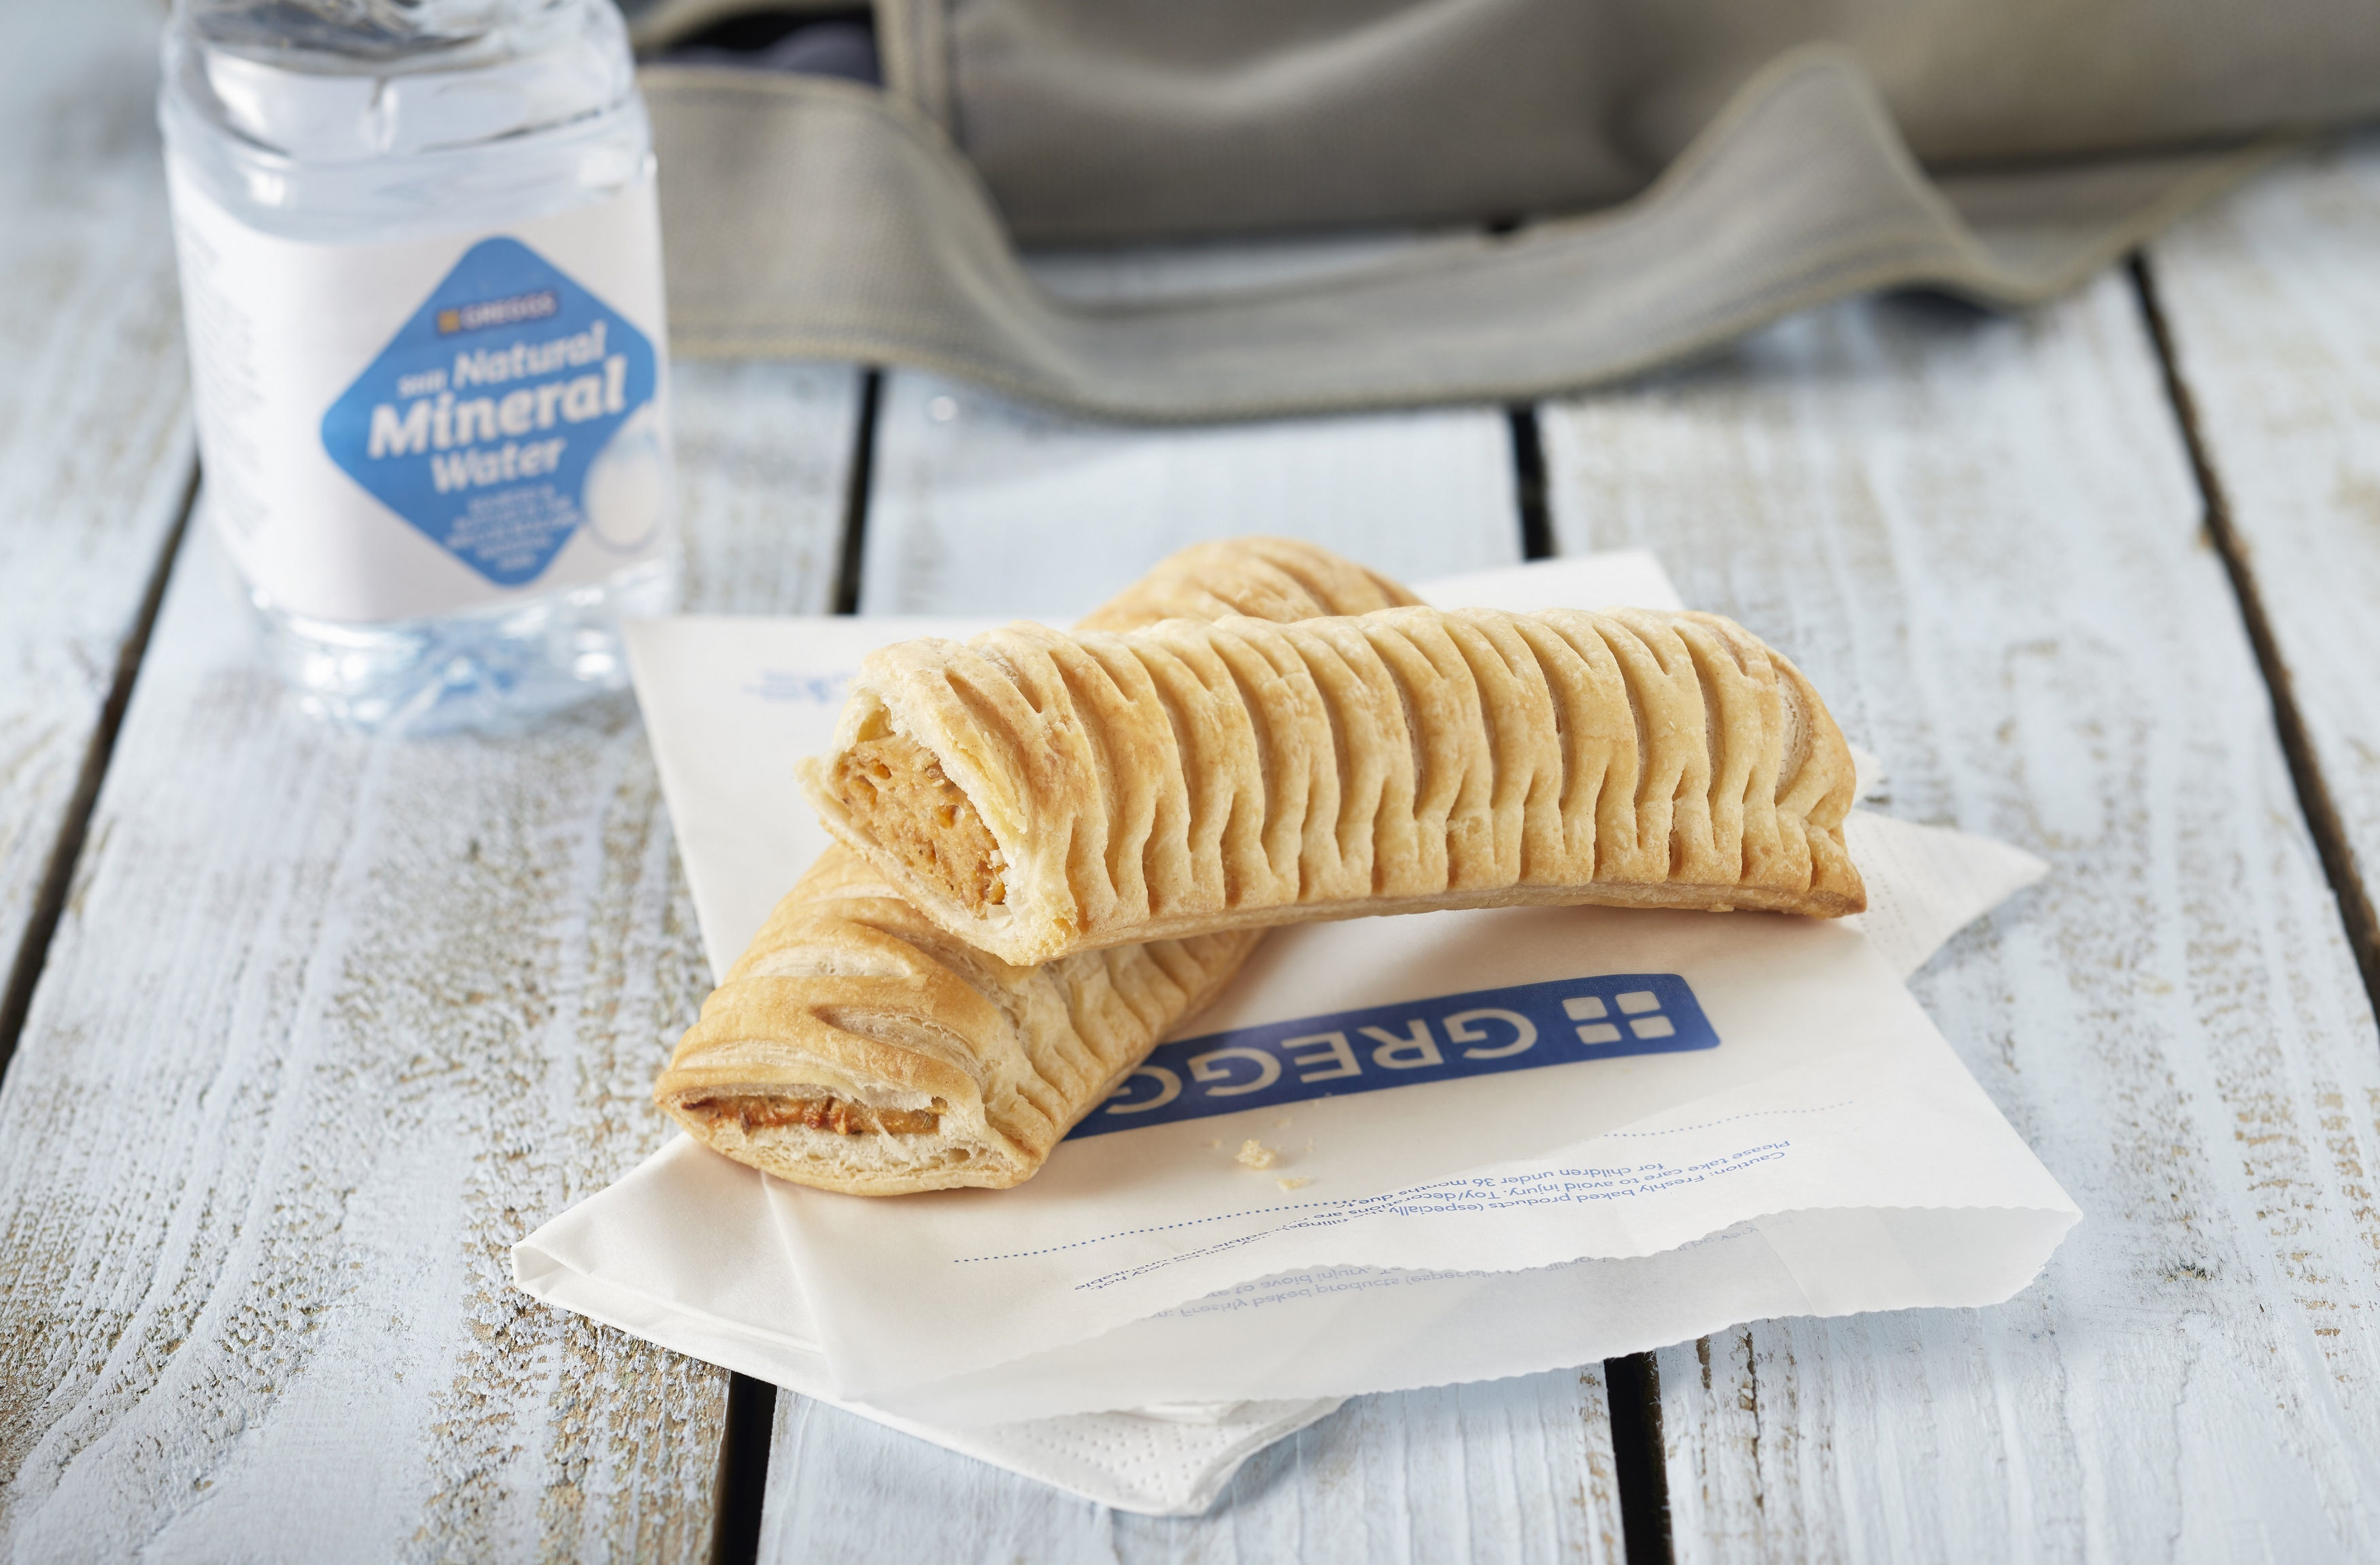 Greggs' new vegan sausage roll which will go on sale from Thursday (Greggs/PA Wire)